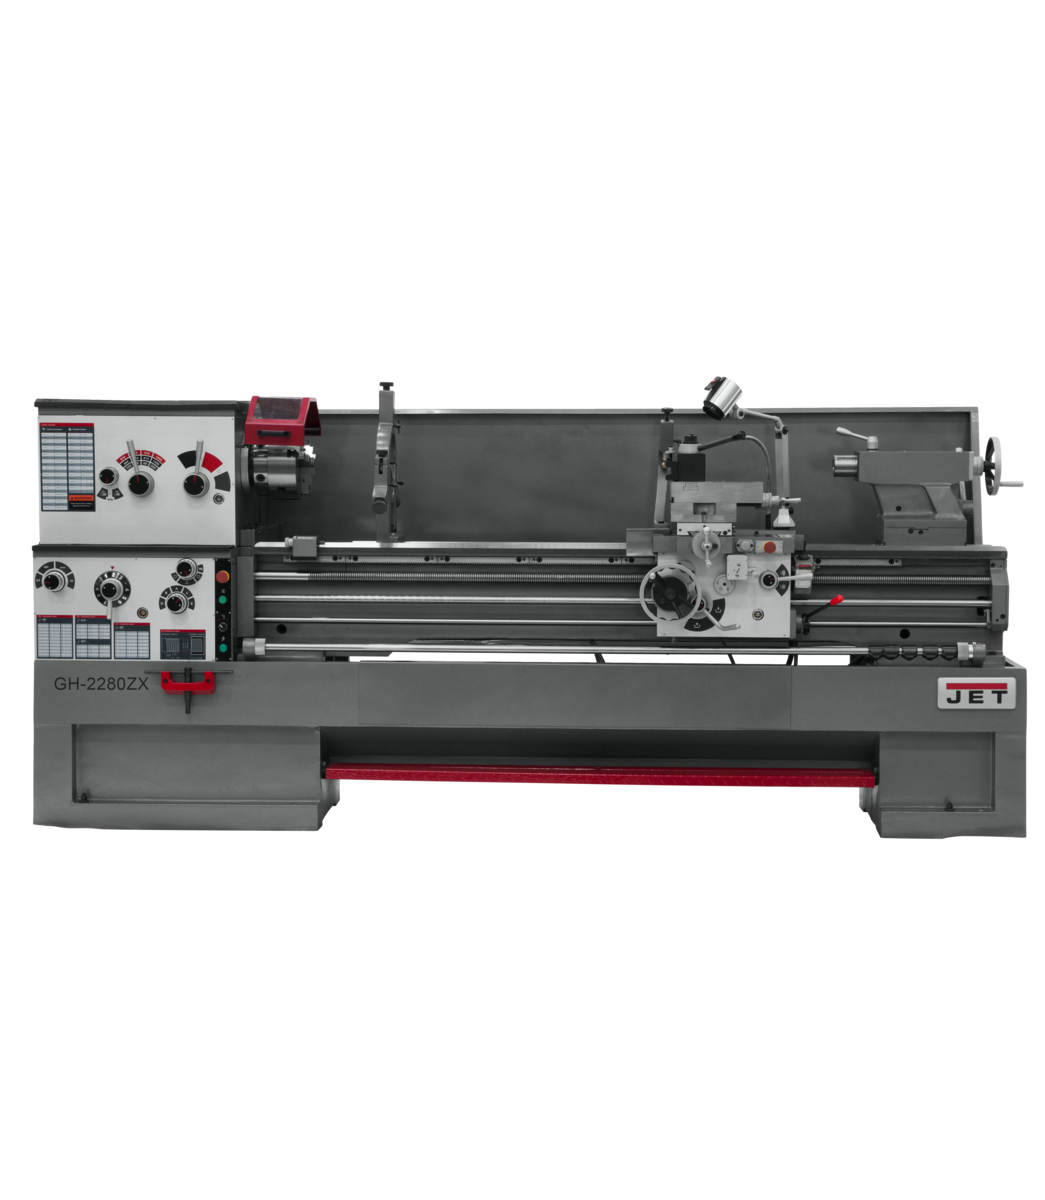 321565, GH-2280ZX , 22" Swing, 80" Between Centers, GH-2280ZX With Taper Attachment installed, Jet, Metalworking, Turning, Lathes